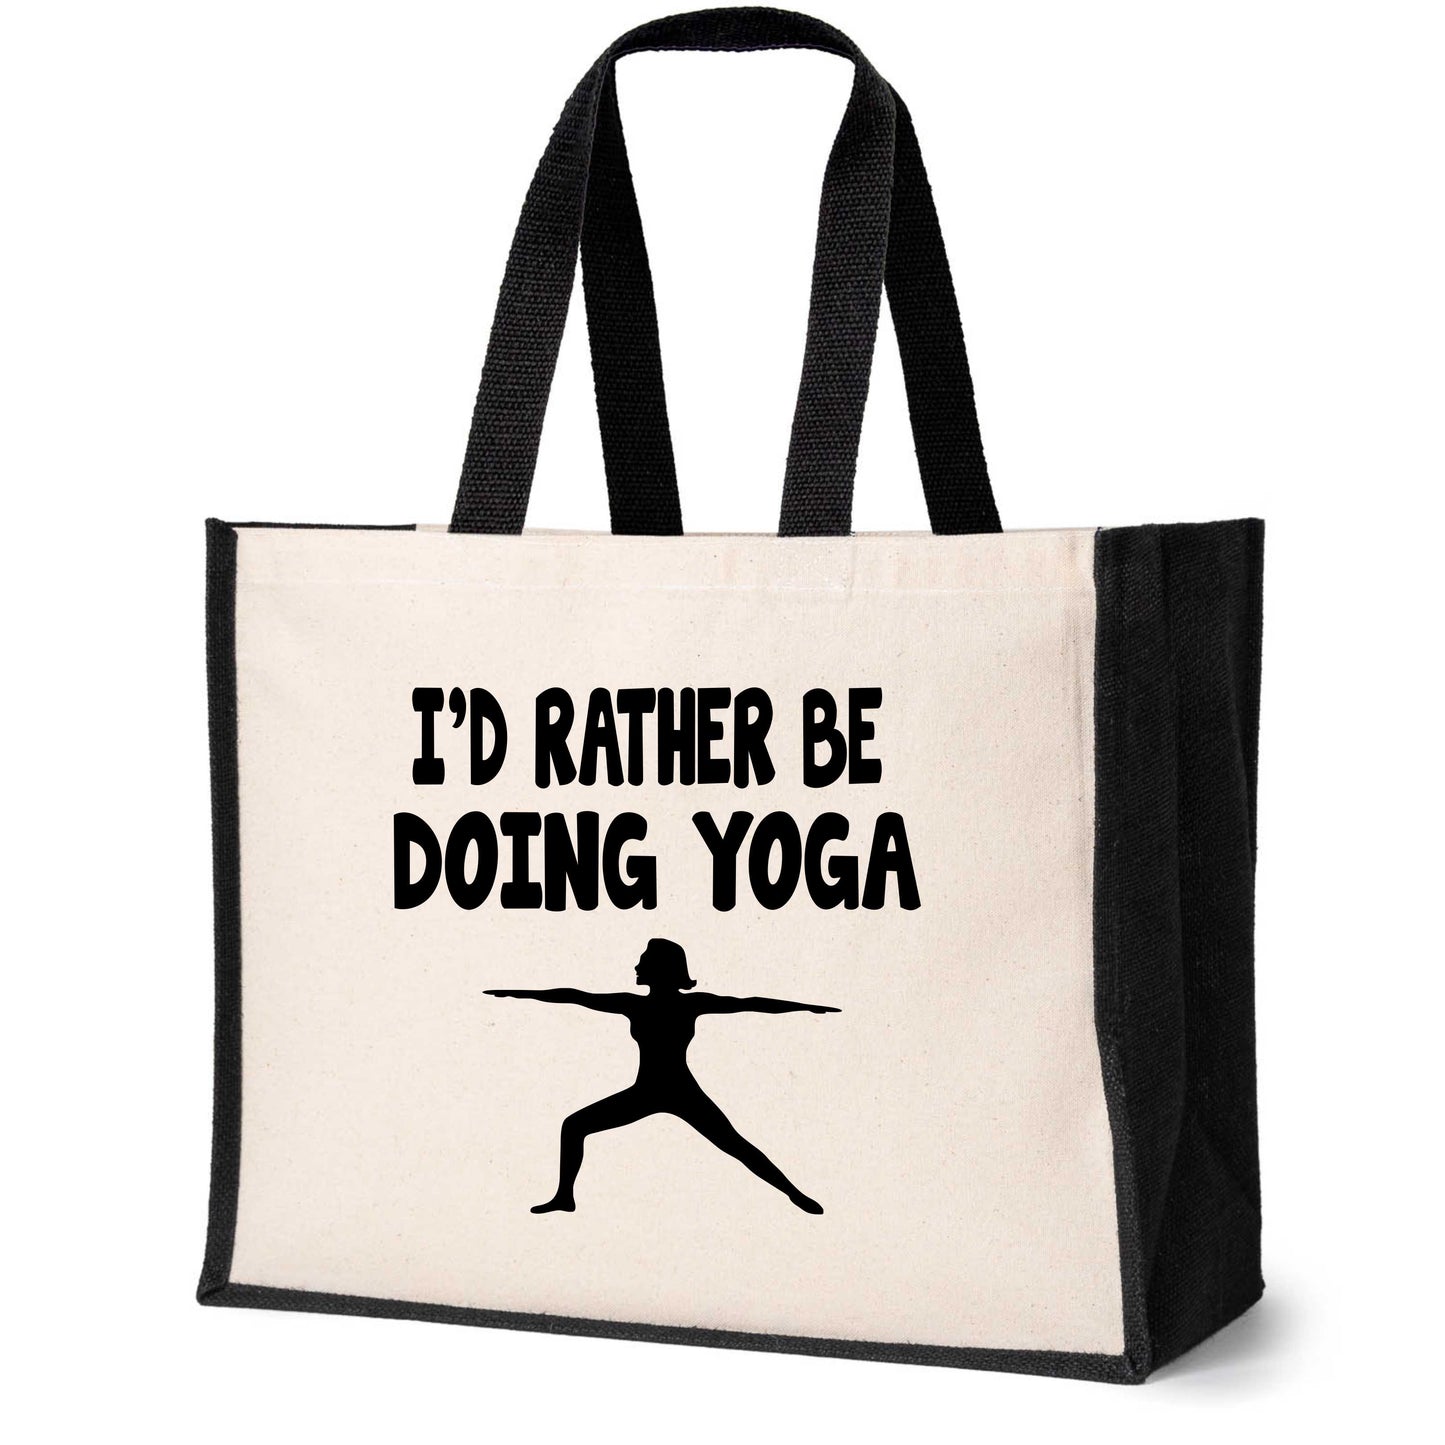 I'd Rather Be Doing Yoga Tote Bag Birthday Gift Ladies Canvas Shopper